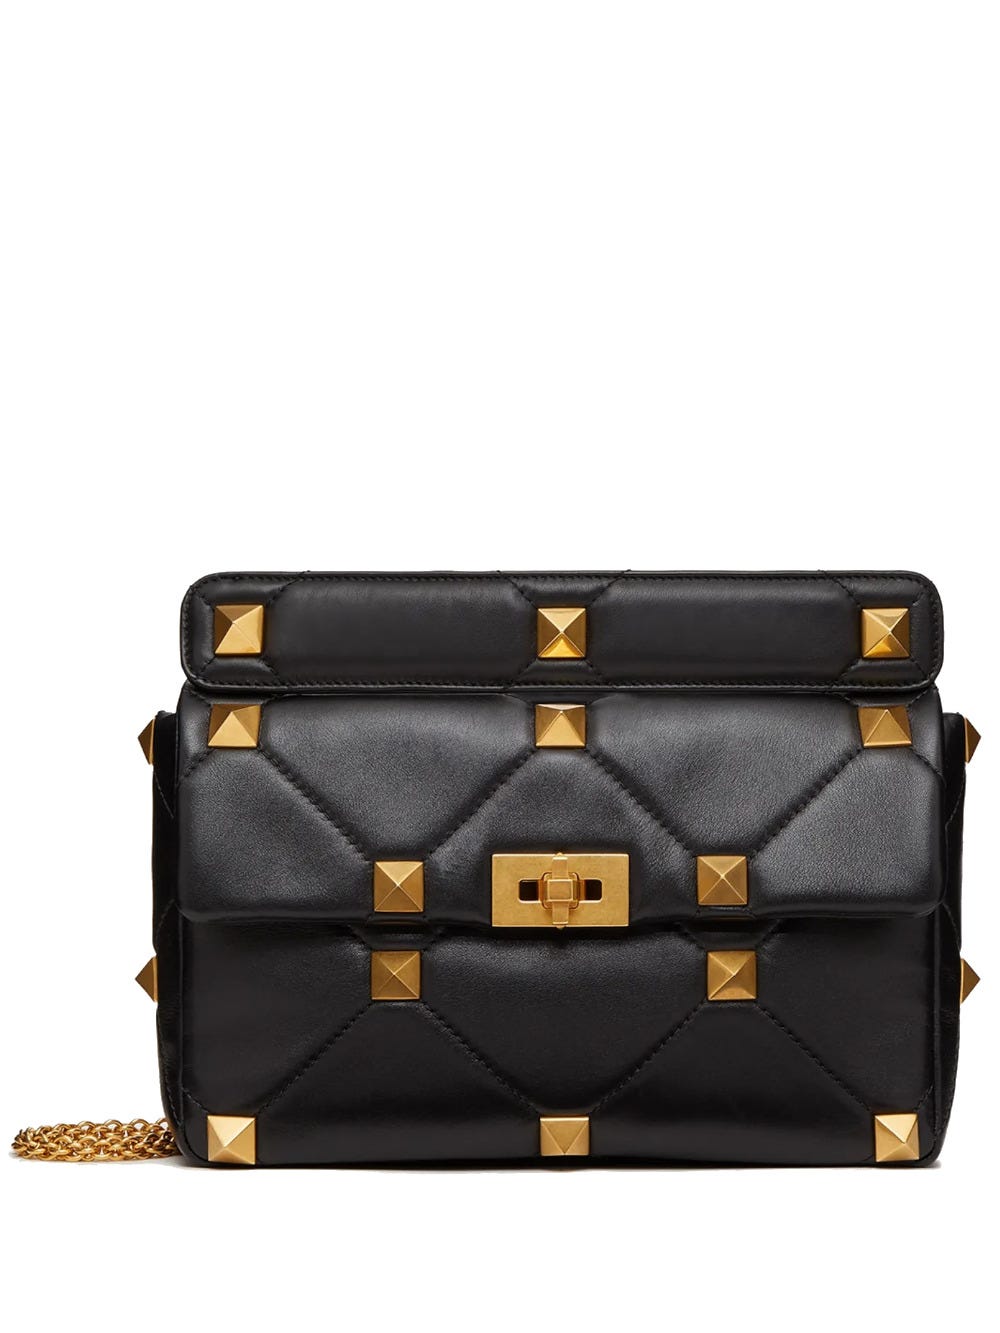 Mantle Engager Atomisk Valentino Garavani Large Black Bag With Gold Roman Stud Chain In Nero |  ModeSens